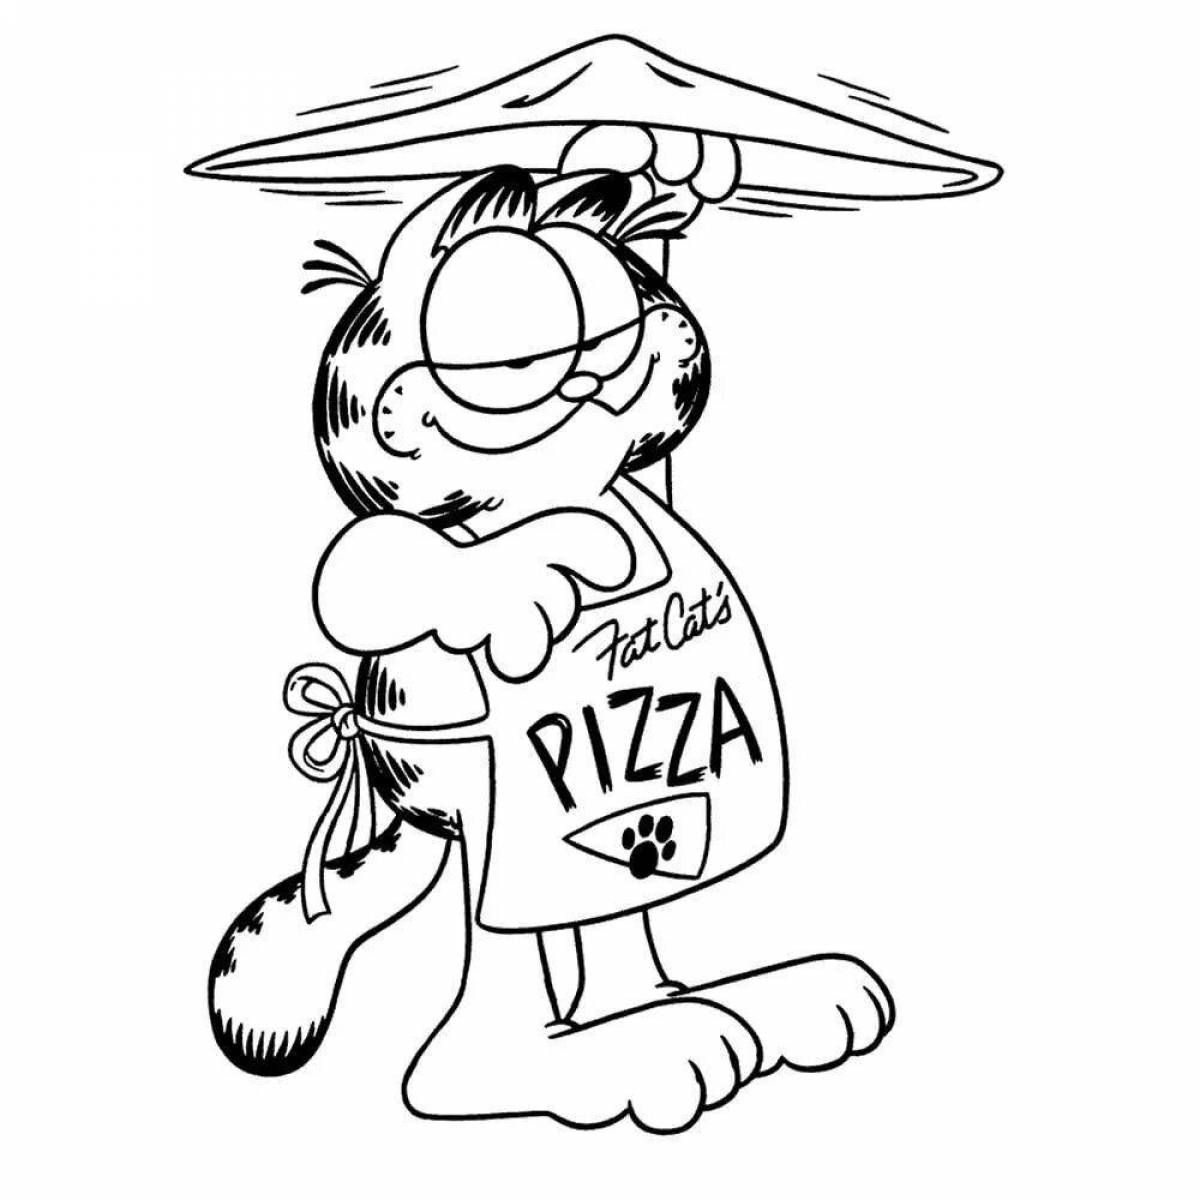 Coloring book witty cat Garfield